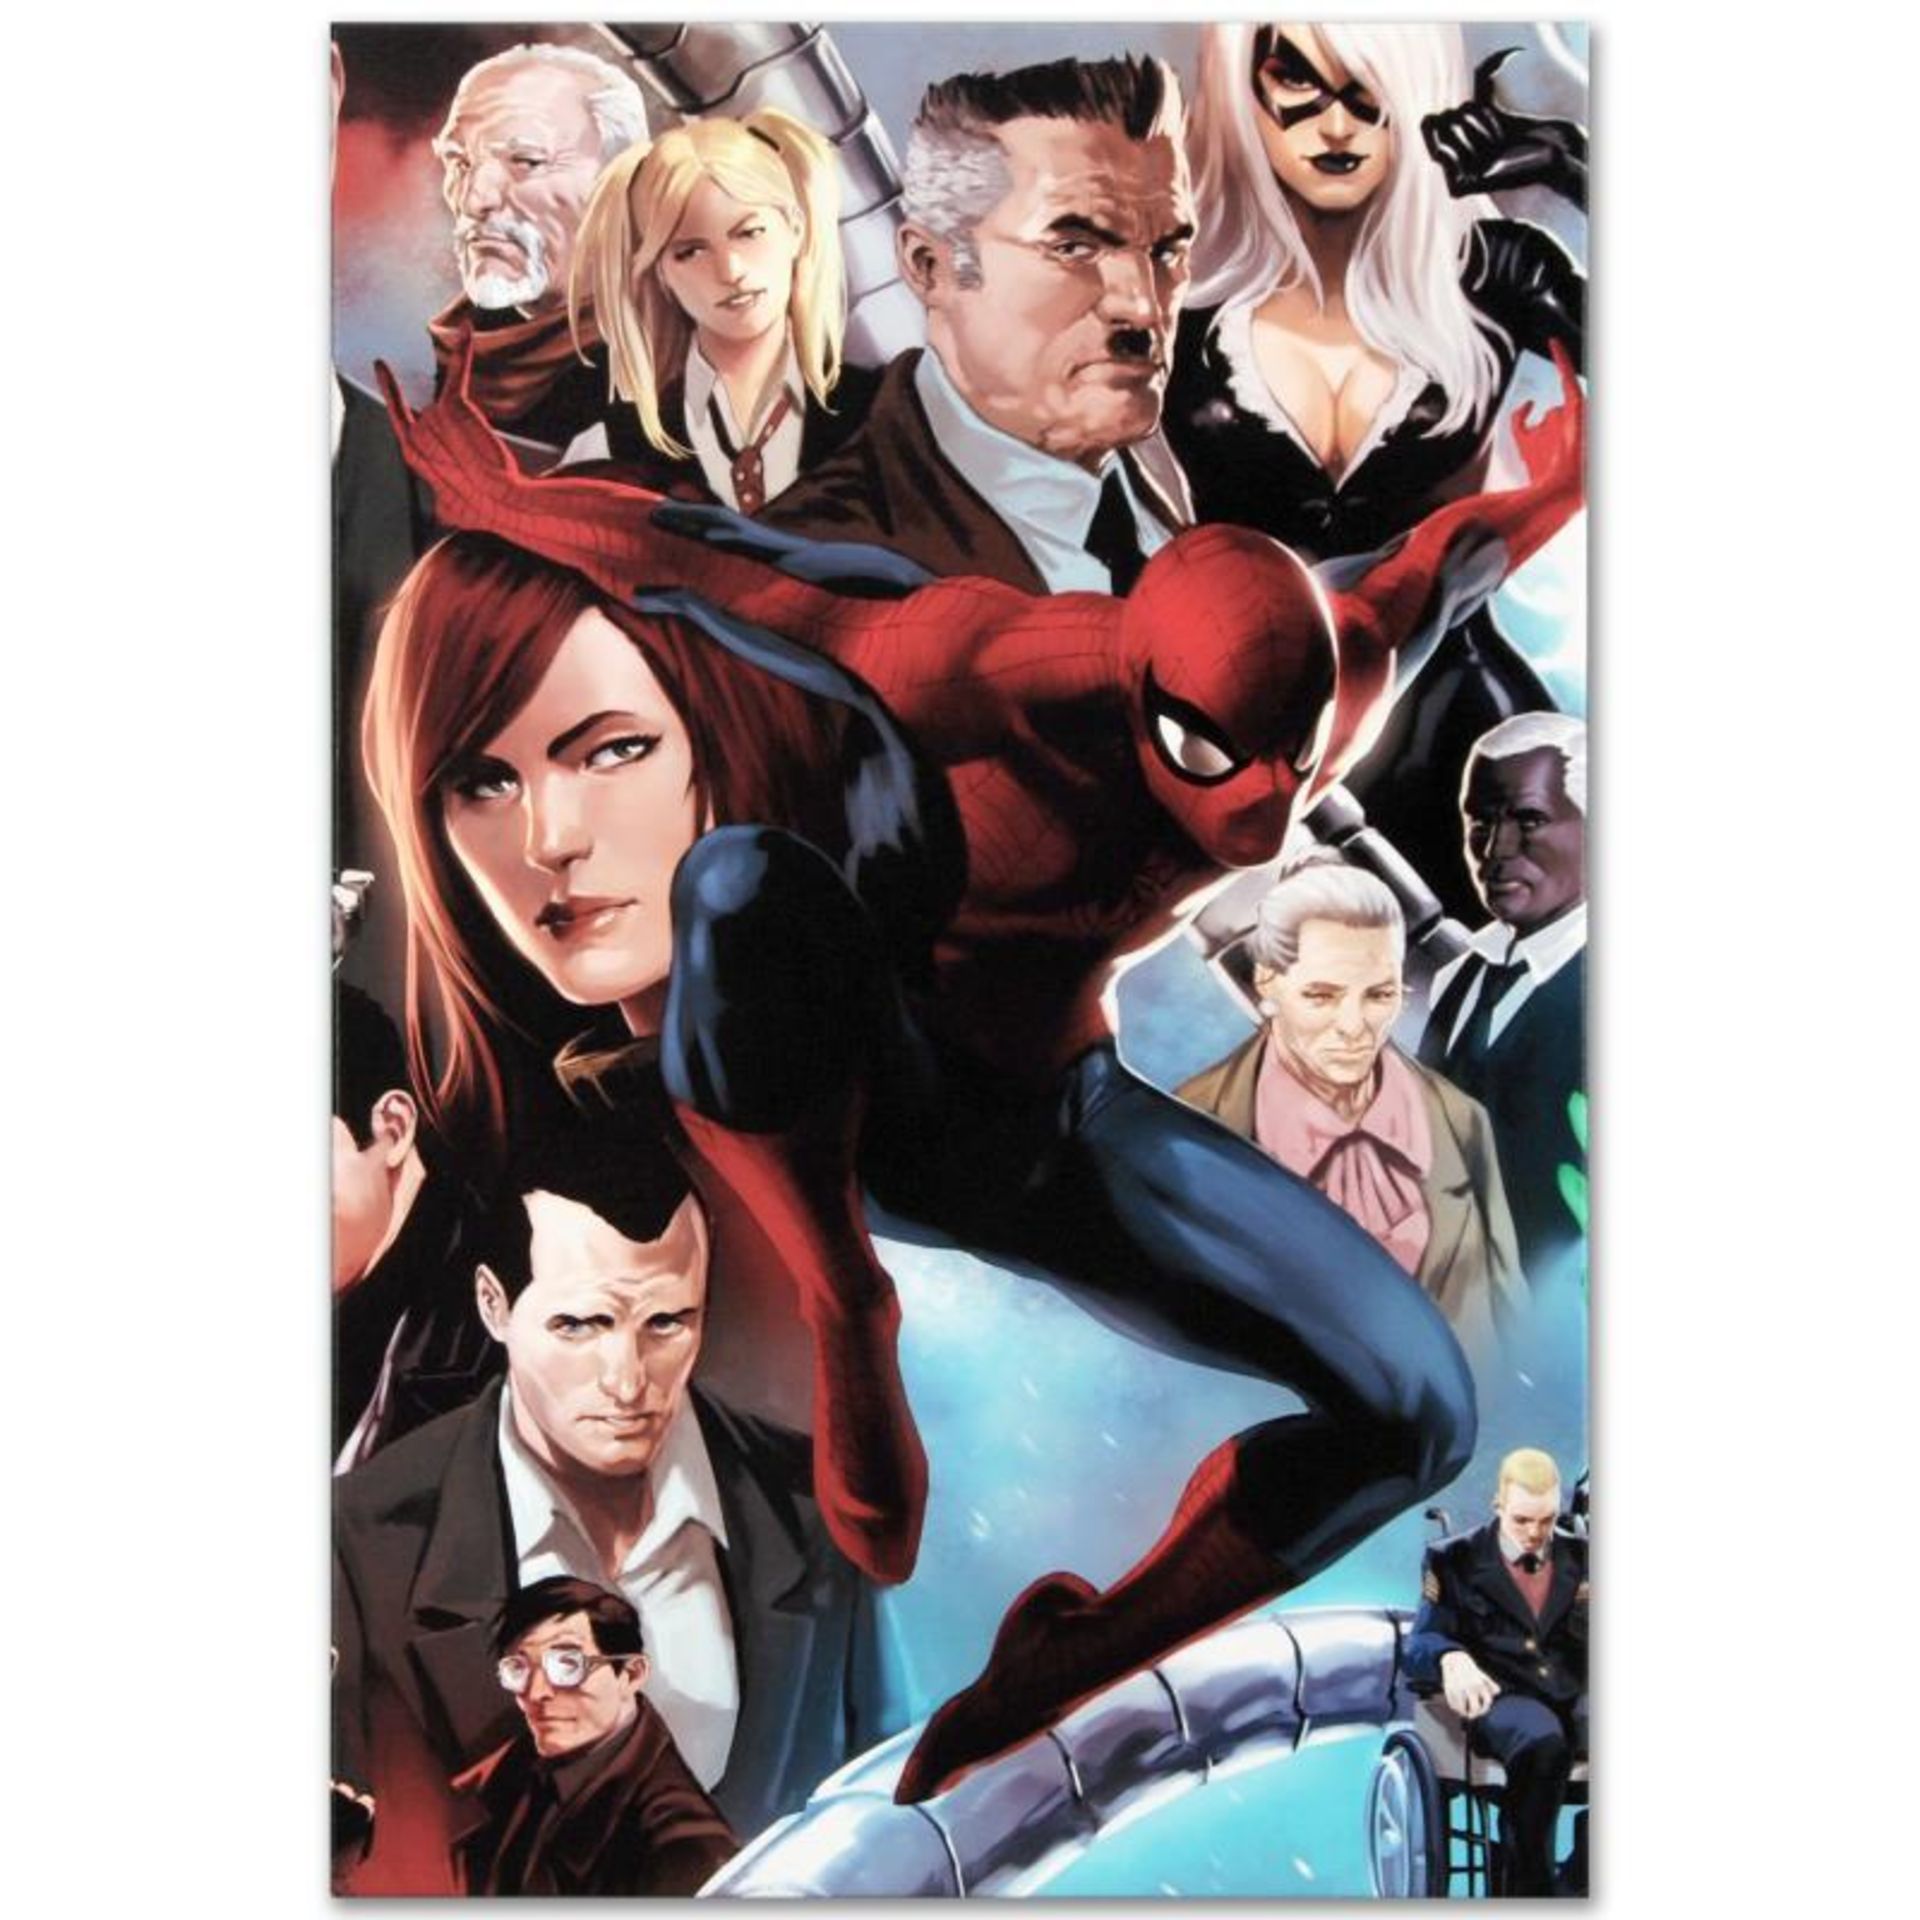 Marvel Comics "Amazing Spider-Man #645" Numbered Limited Edition Giclee on Canva